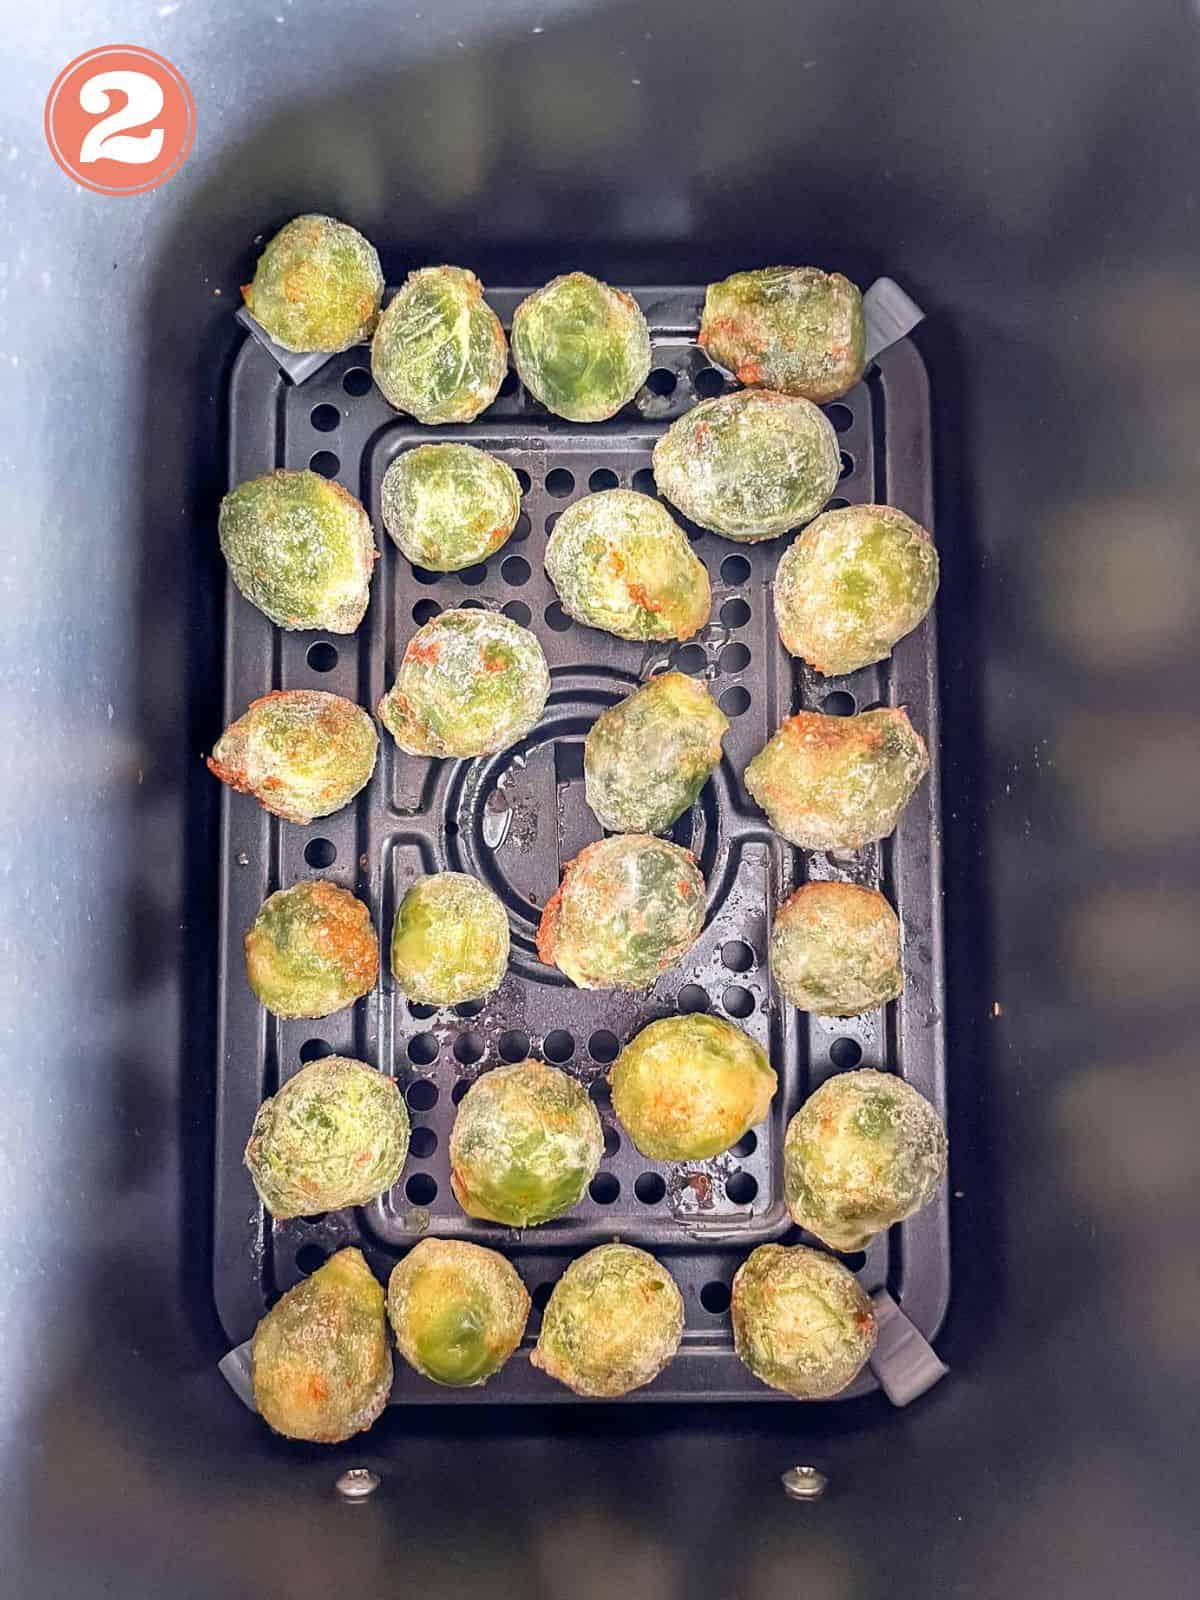 frozen Brussels sprouts in an air fryer basket labelled number two.